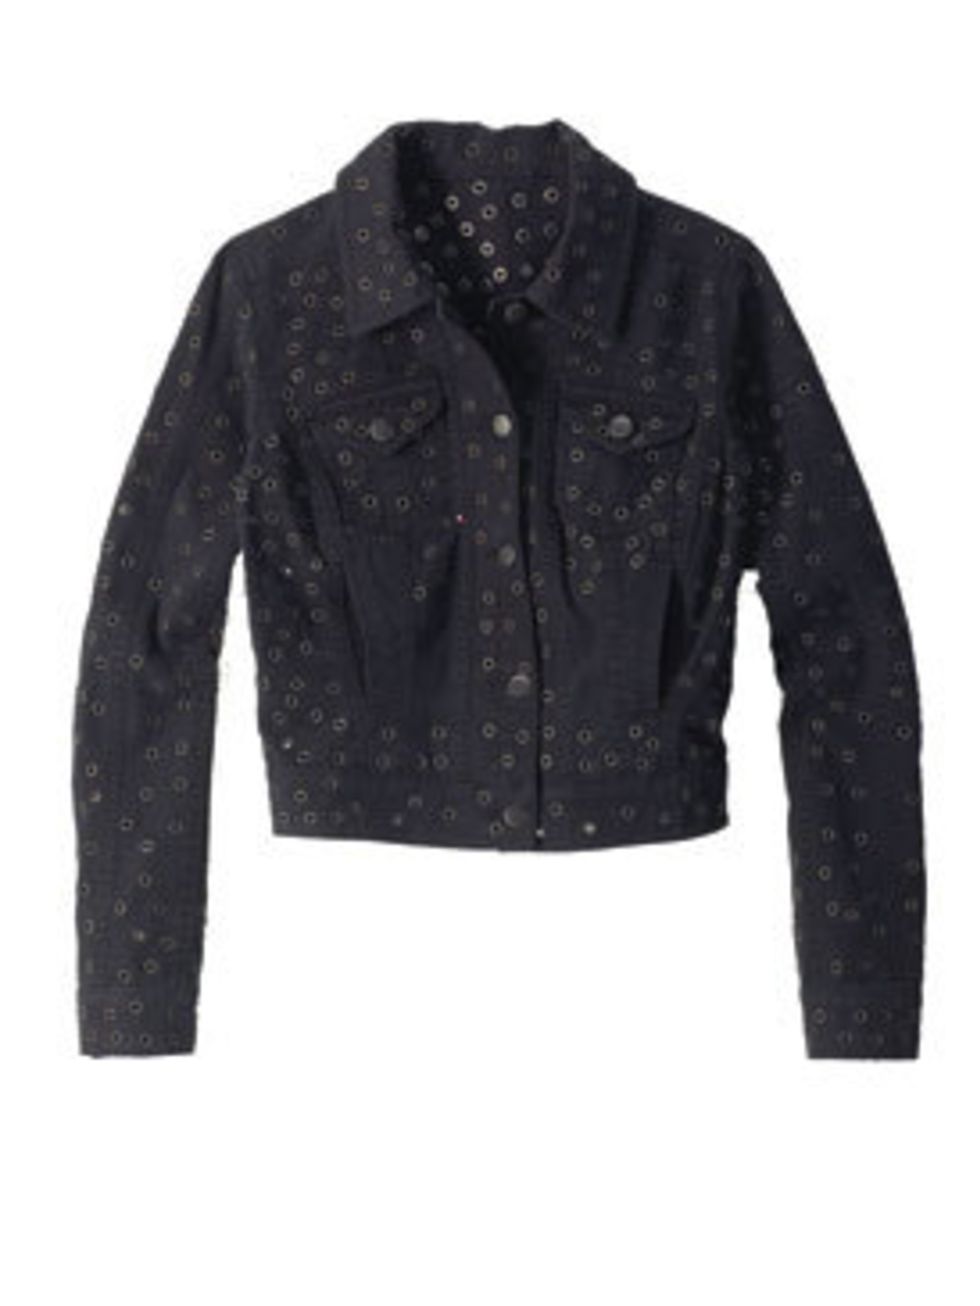 <p>Black jacket, £100, by Christopher Kane for Topshop (0845 121 4519)</p>